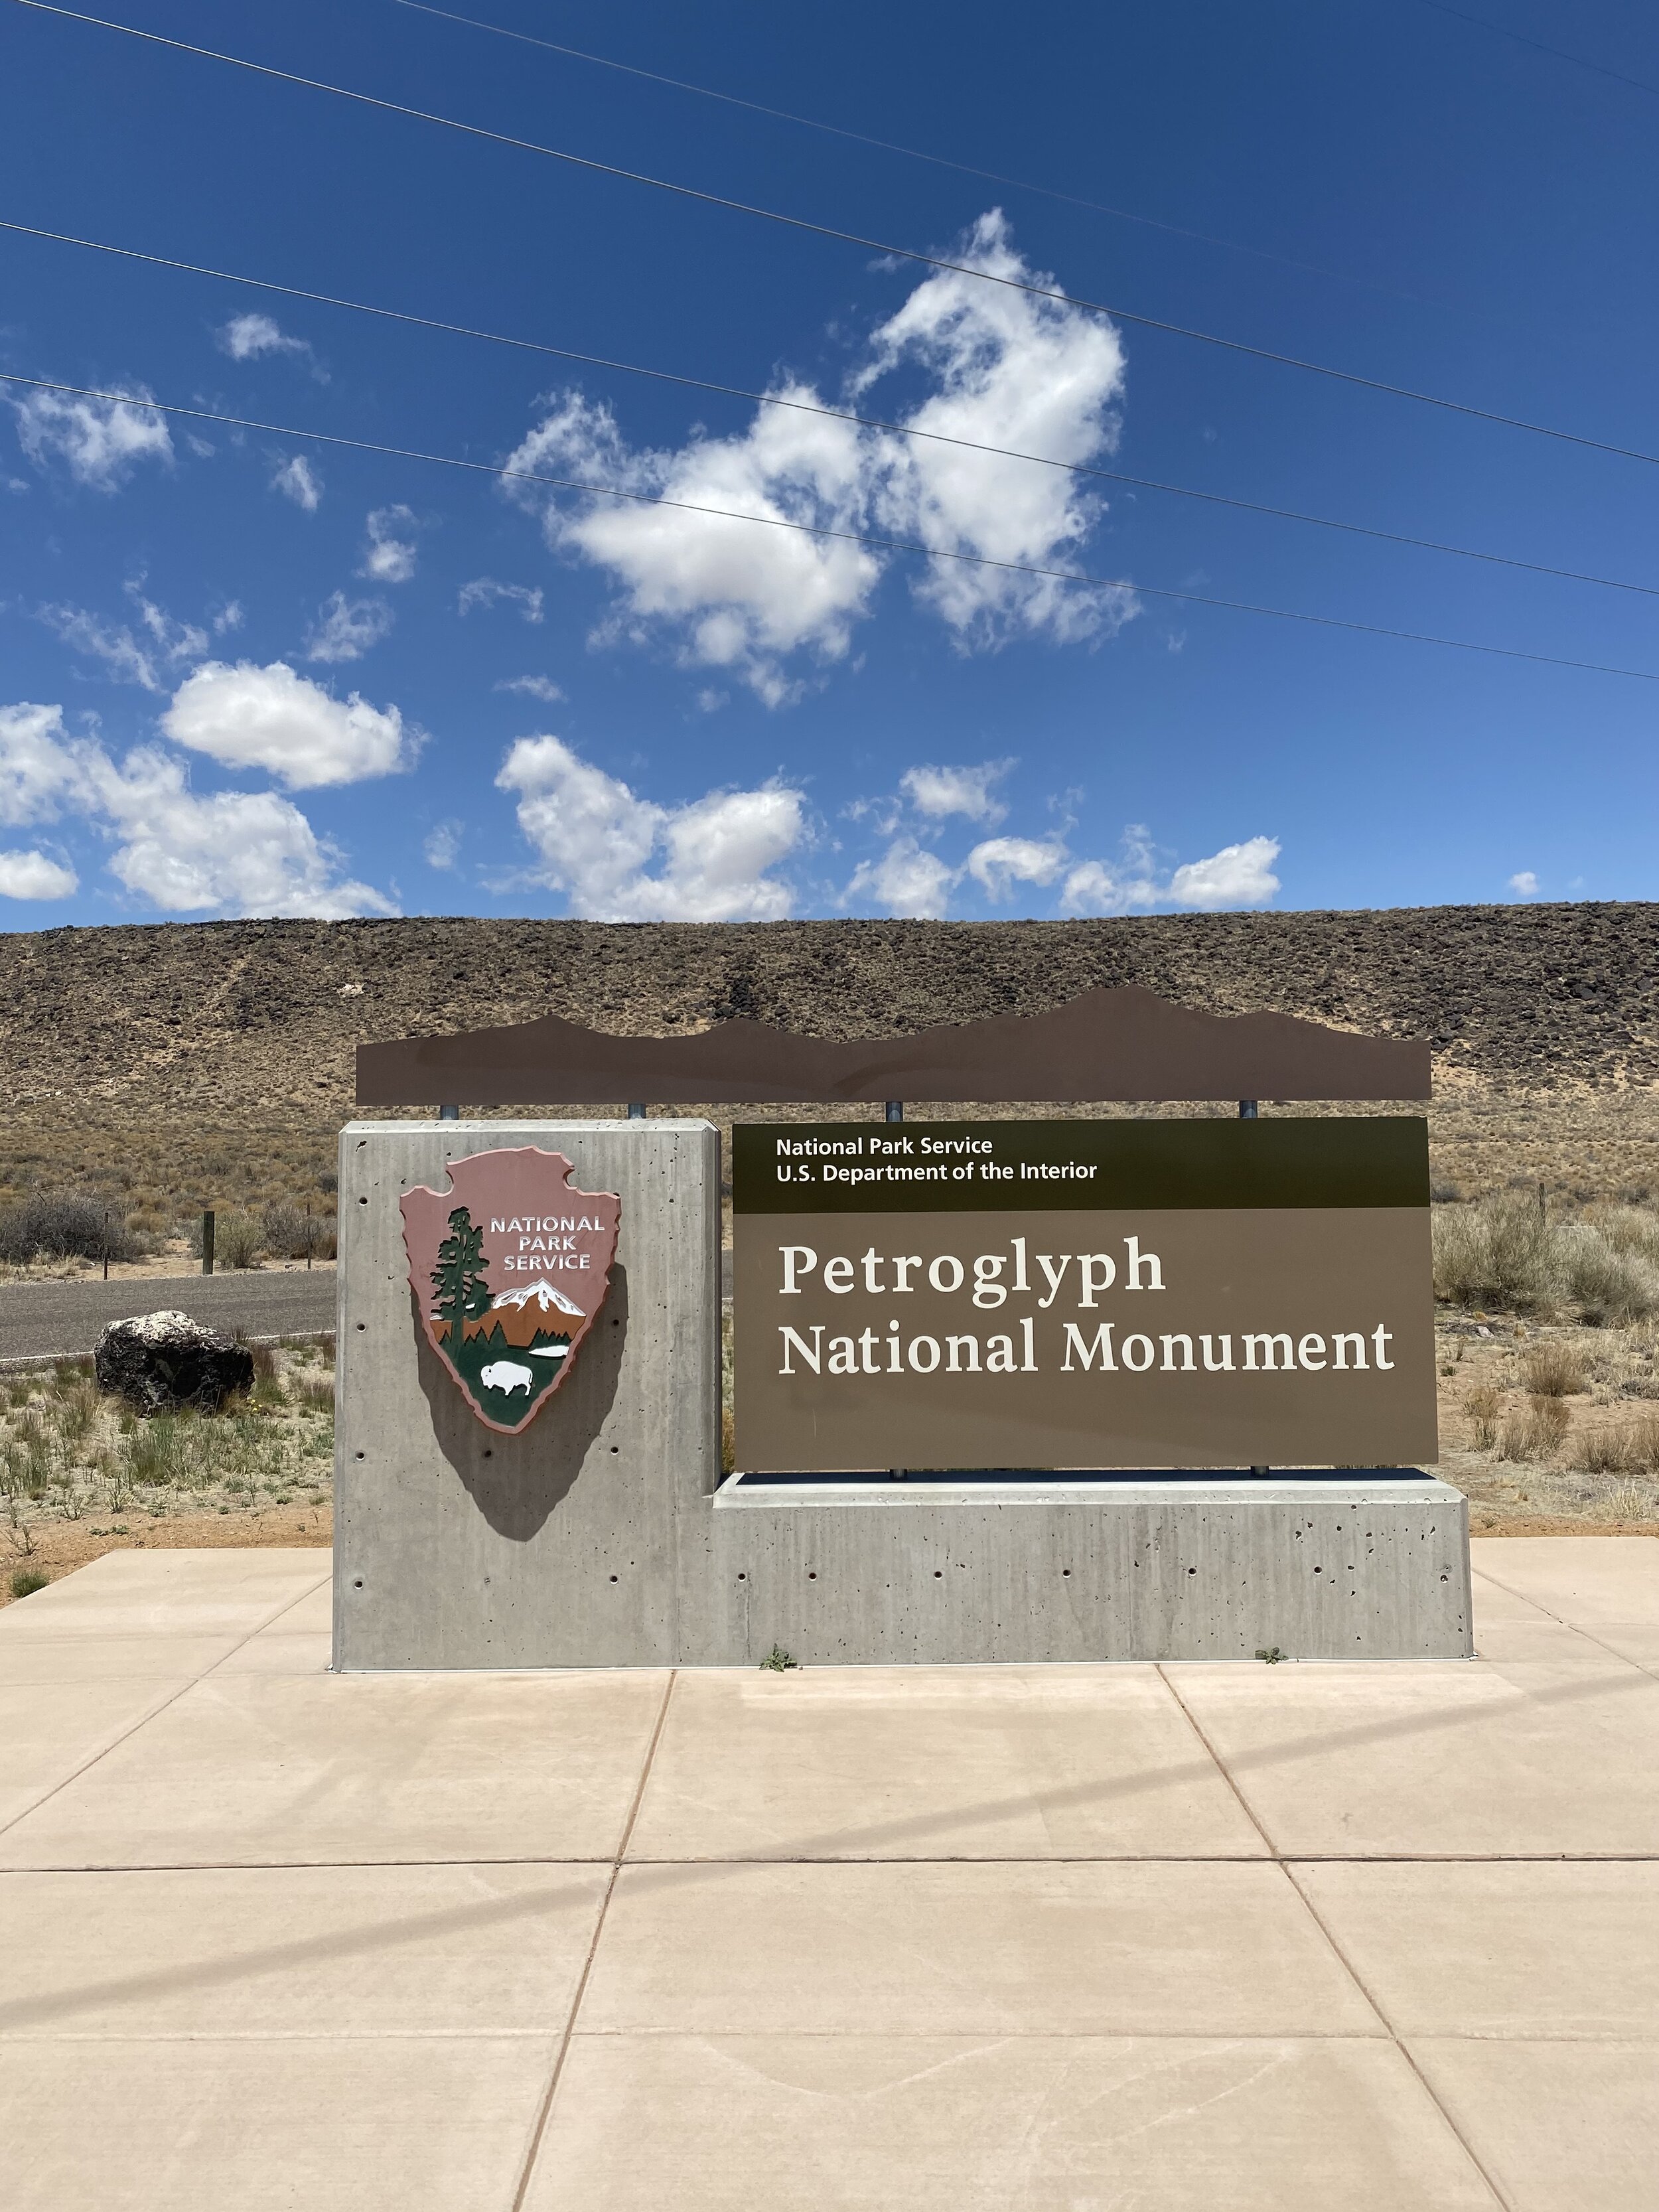 Entrance sign to Petroglyph National Monument in New Mexico